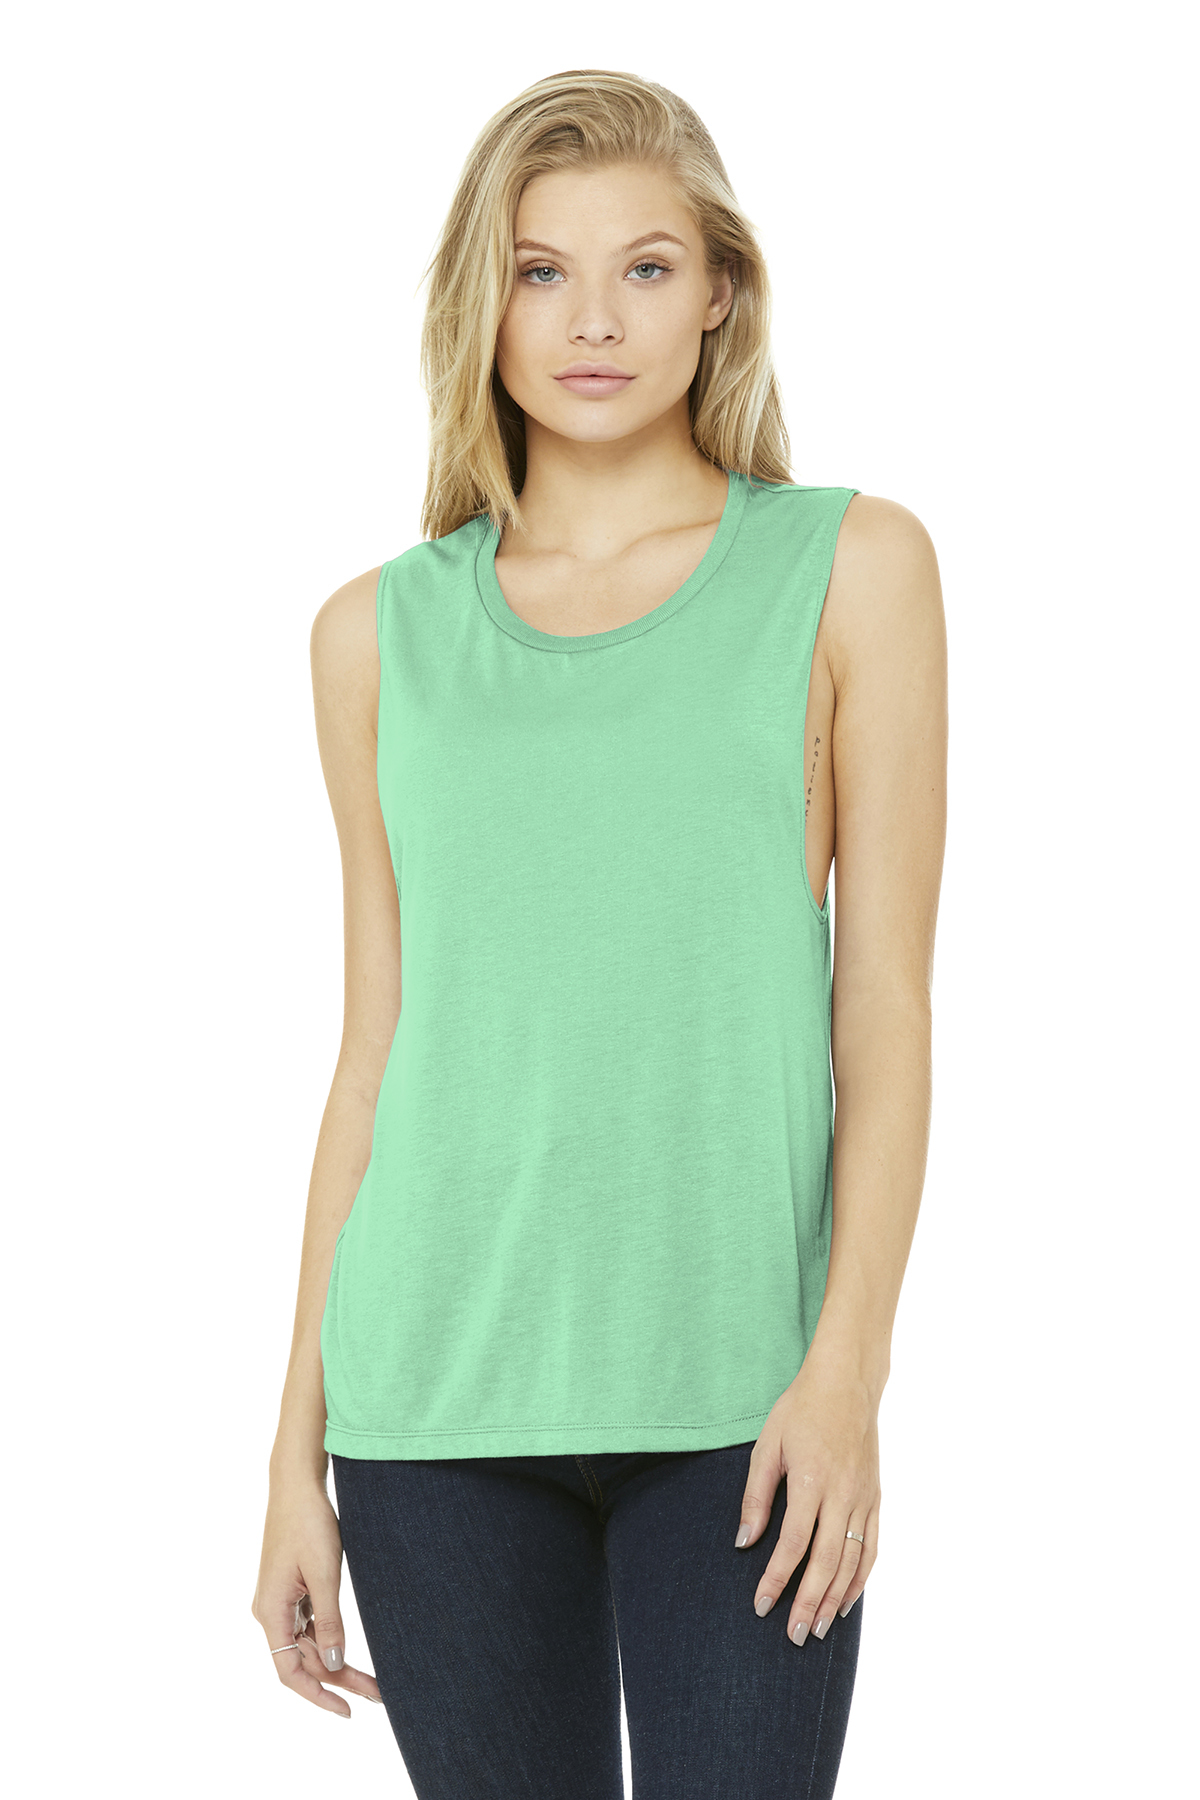 VENOM Scoop Muscle Tank Several Colors Available Women's Flowy Tank Top